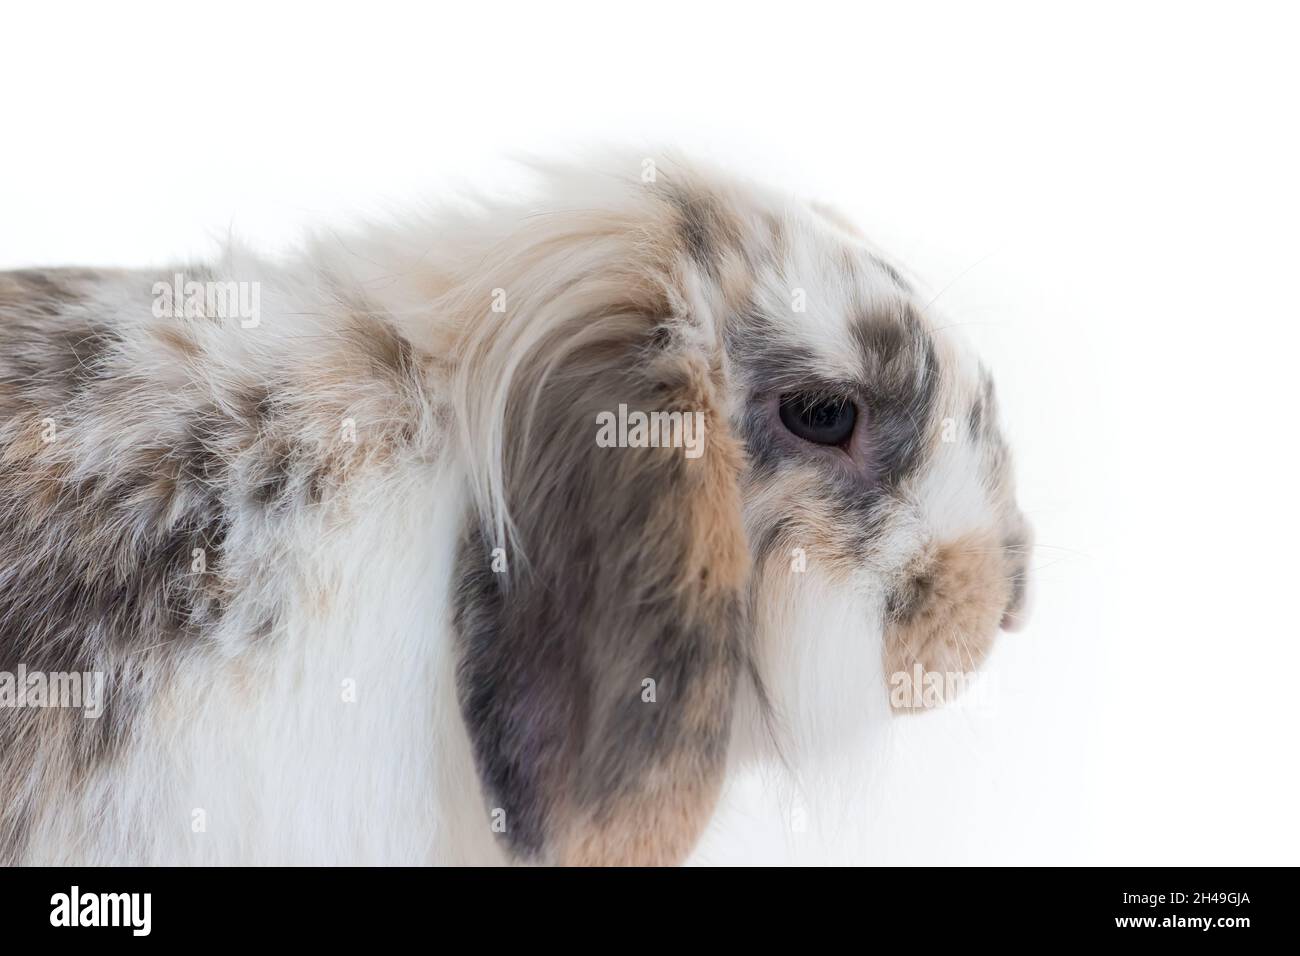 cute spotted lop rabbit head on white background Stock Photo